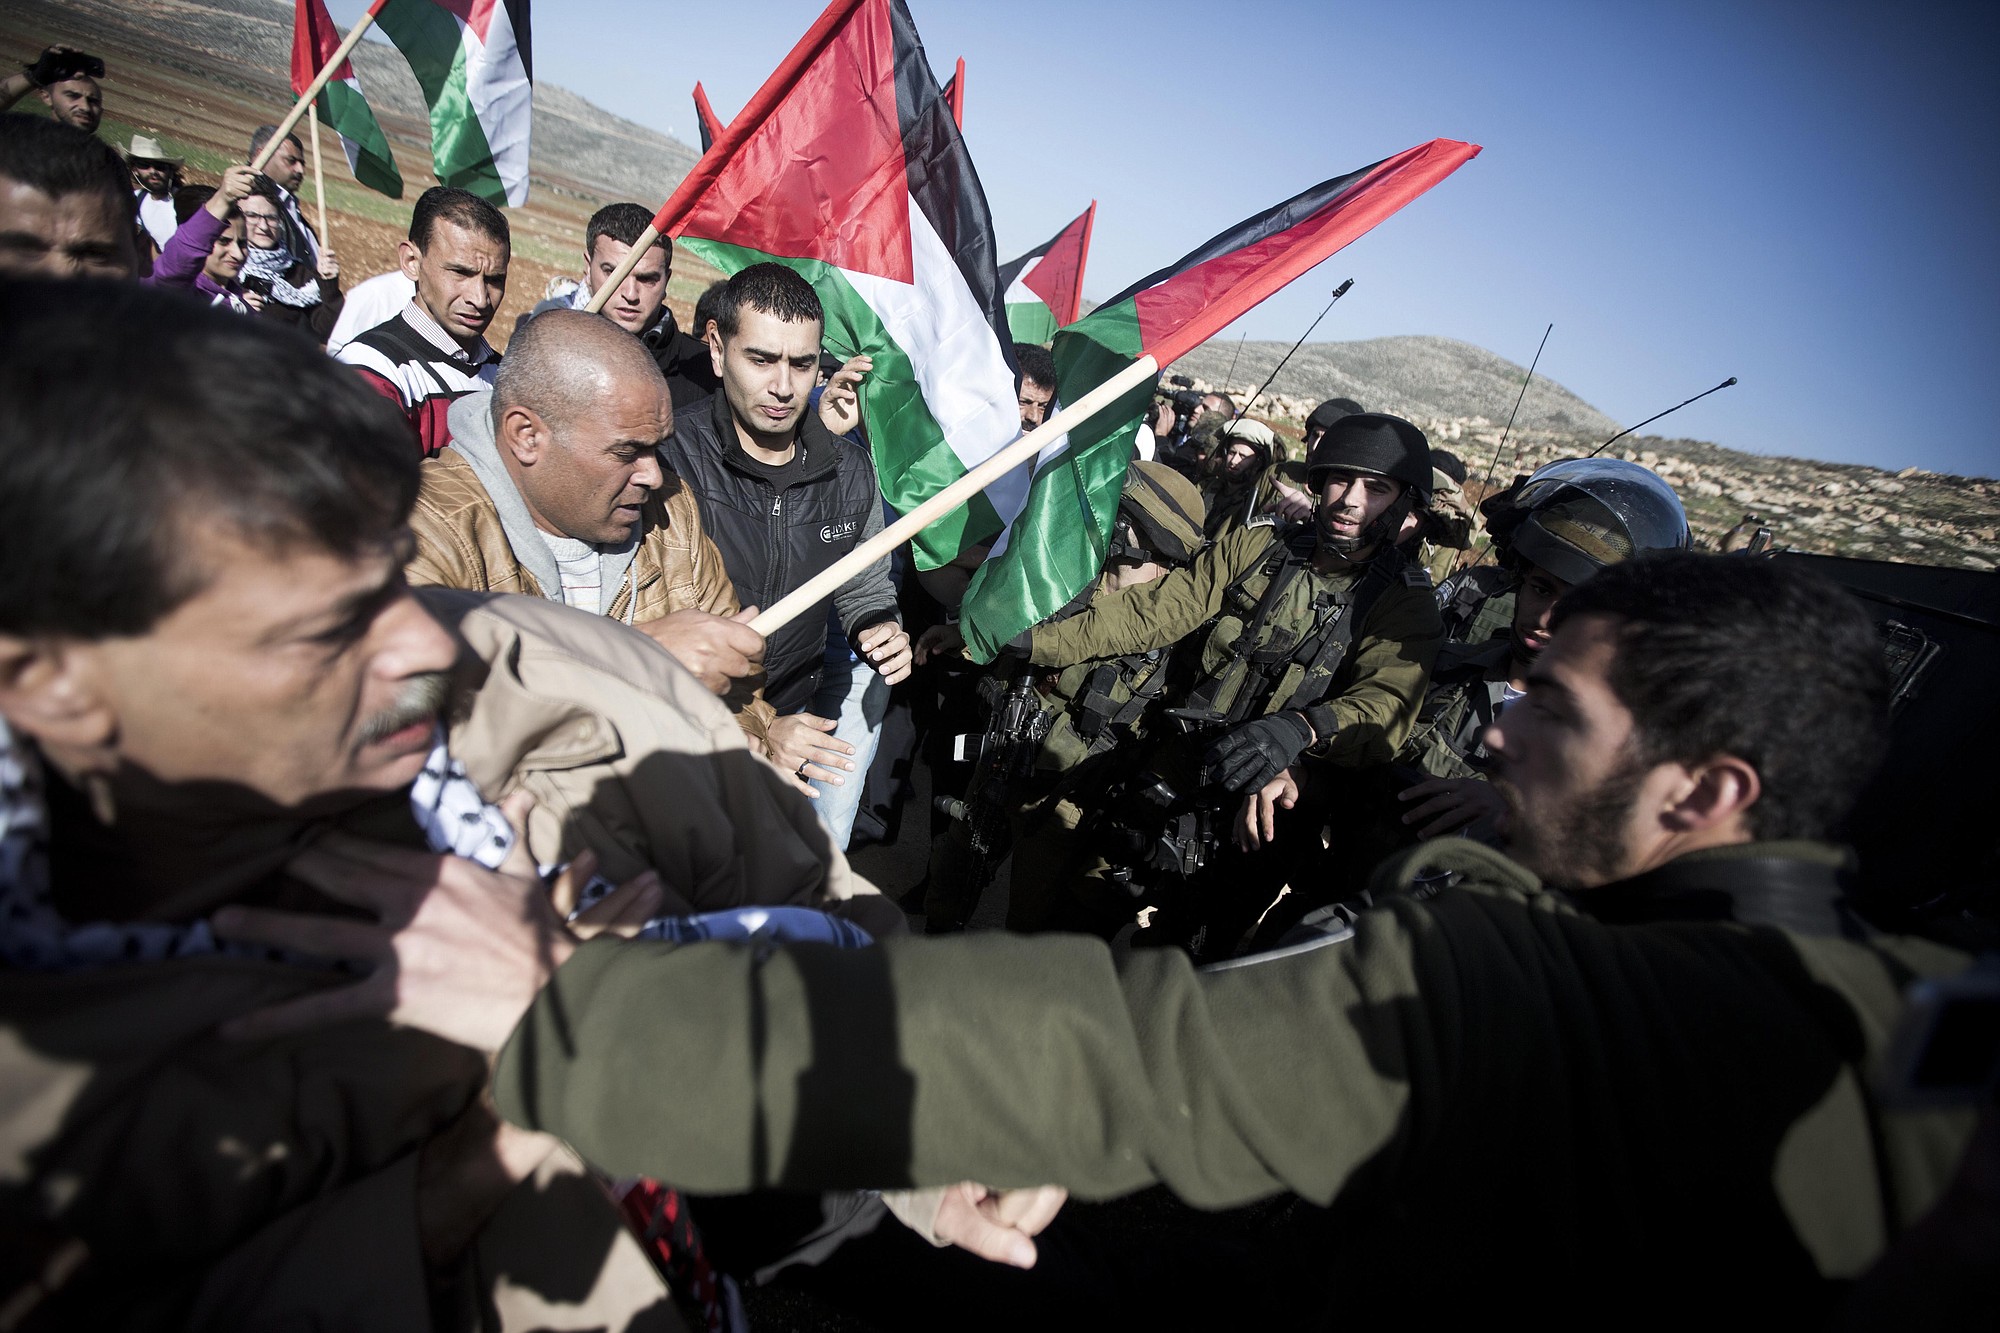 An Israeli soldier pushes Palestinian Cabinet member Ziad Abu Ain, left, during a protest in the village of Turmus Aya near the West Bank city of Ramallah on Wednesday.